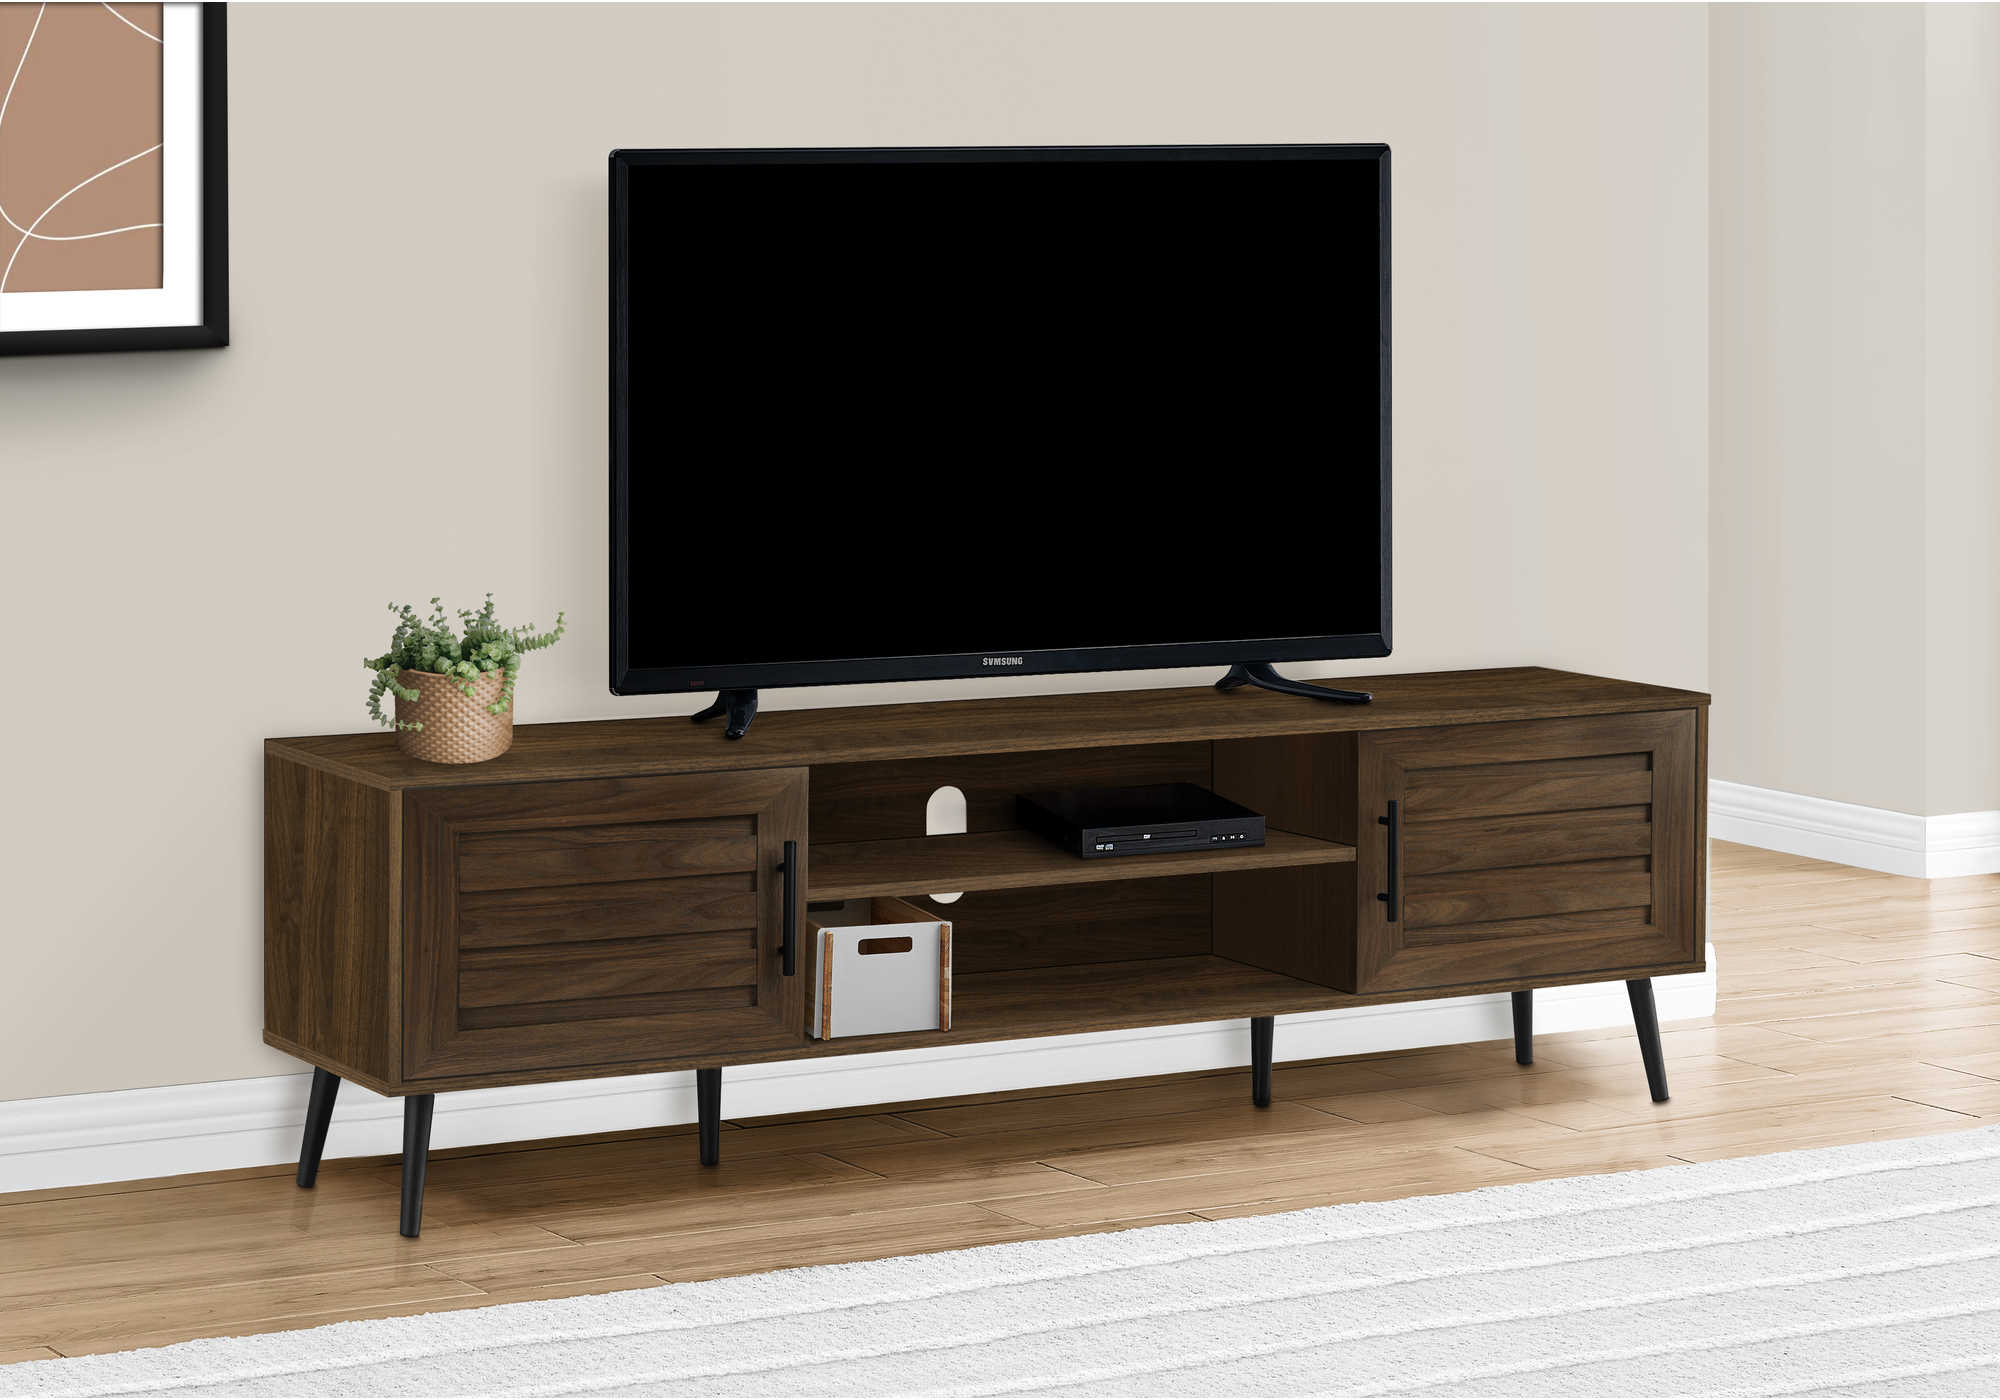 TV STAND - 72"L / BROWN WOOD-LOOK WITH 2 DOORS 